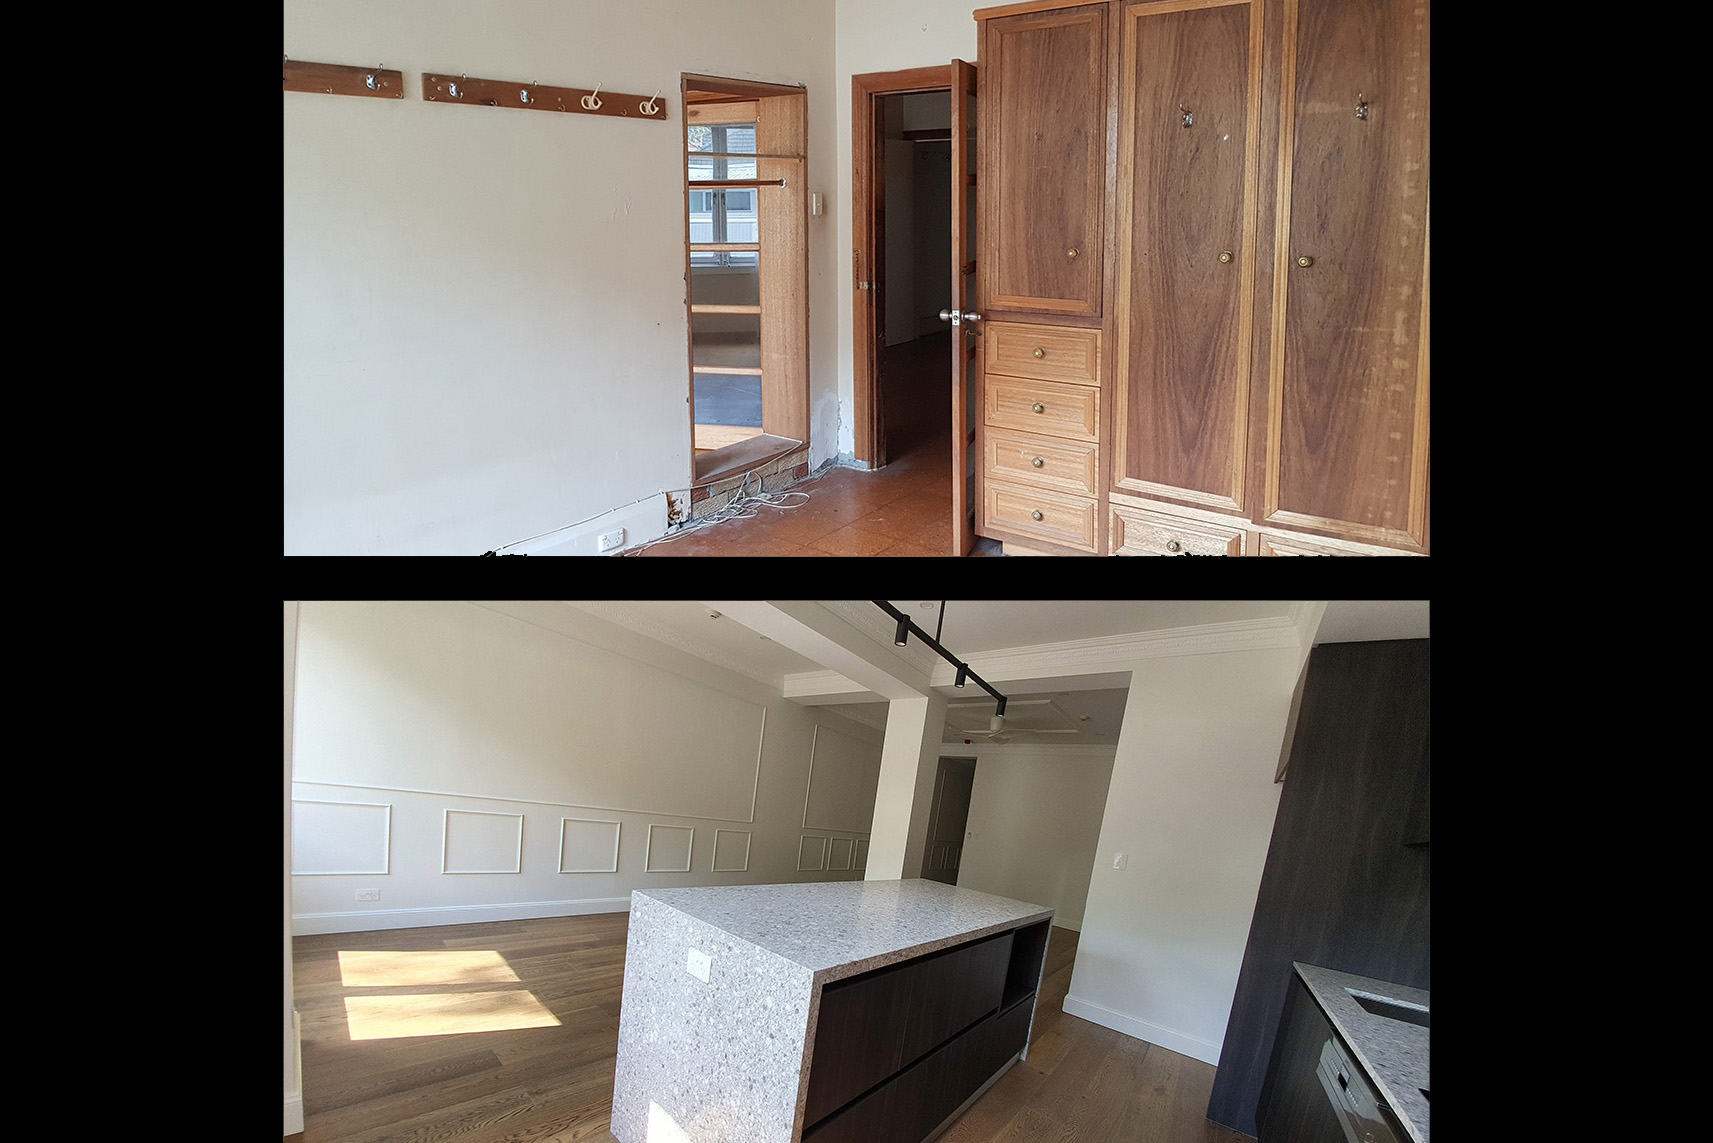 A before and after picture of the kitchen.